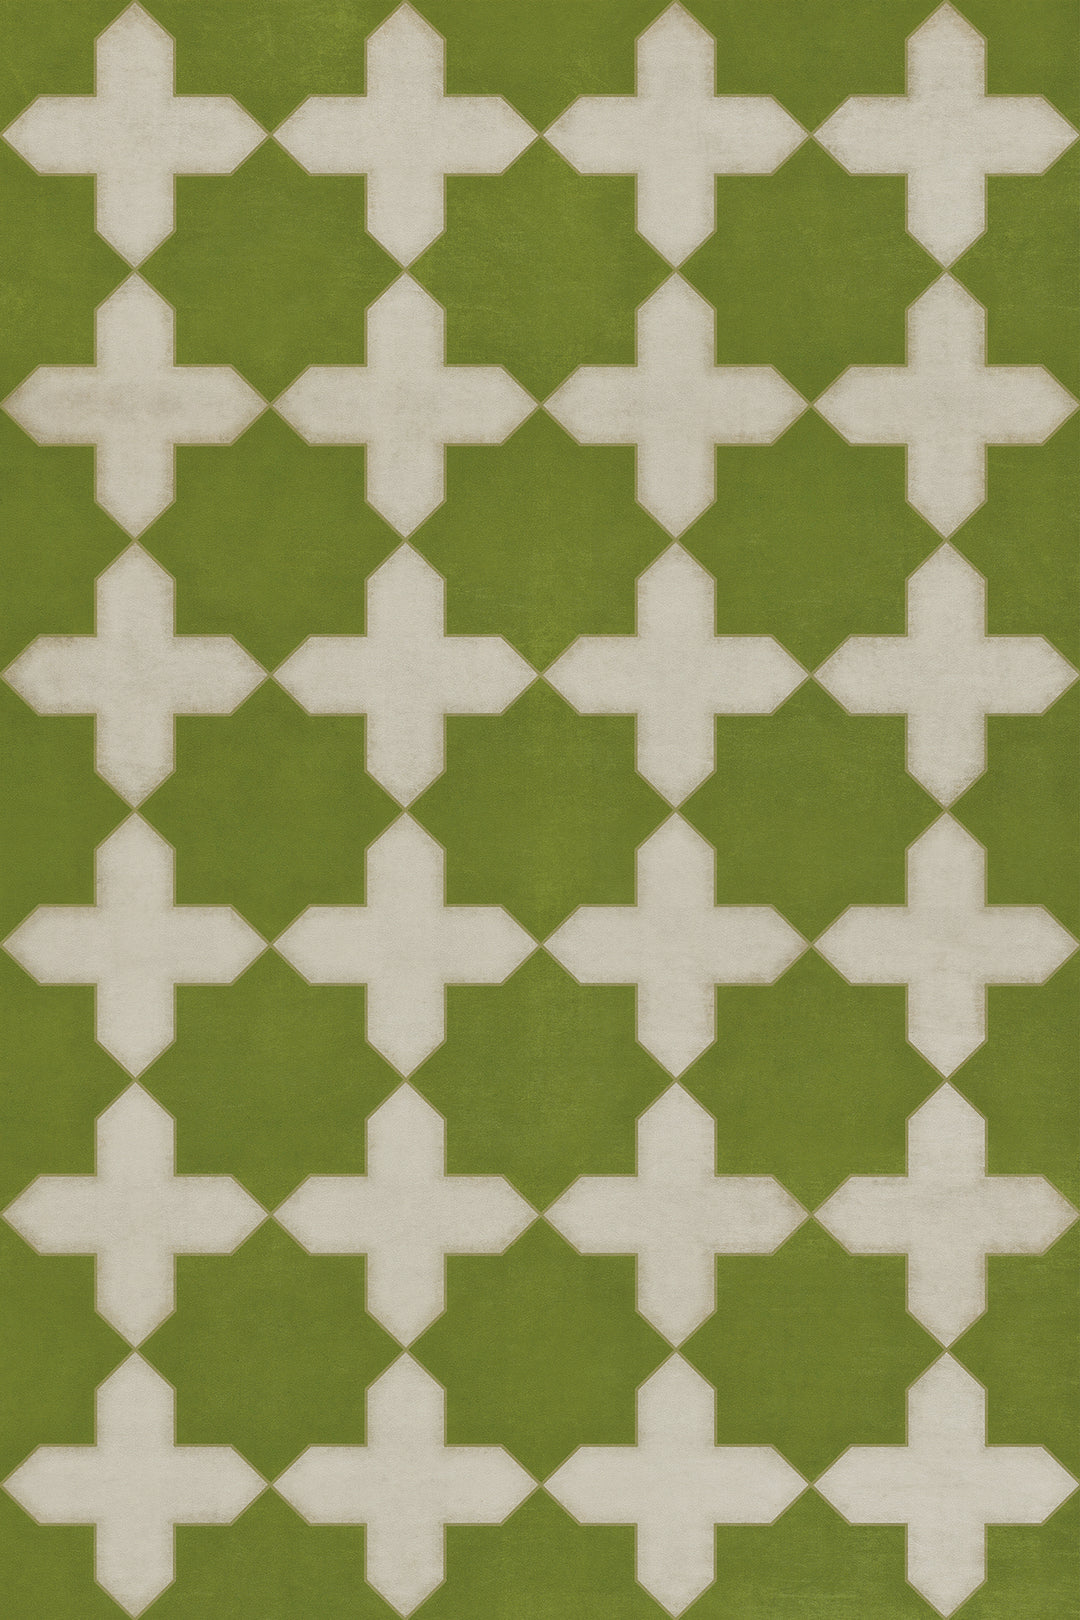 Vintage Vinyl Floorcloth Mat (Classic Pattern 23 Nor Any Green Thing)